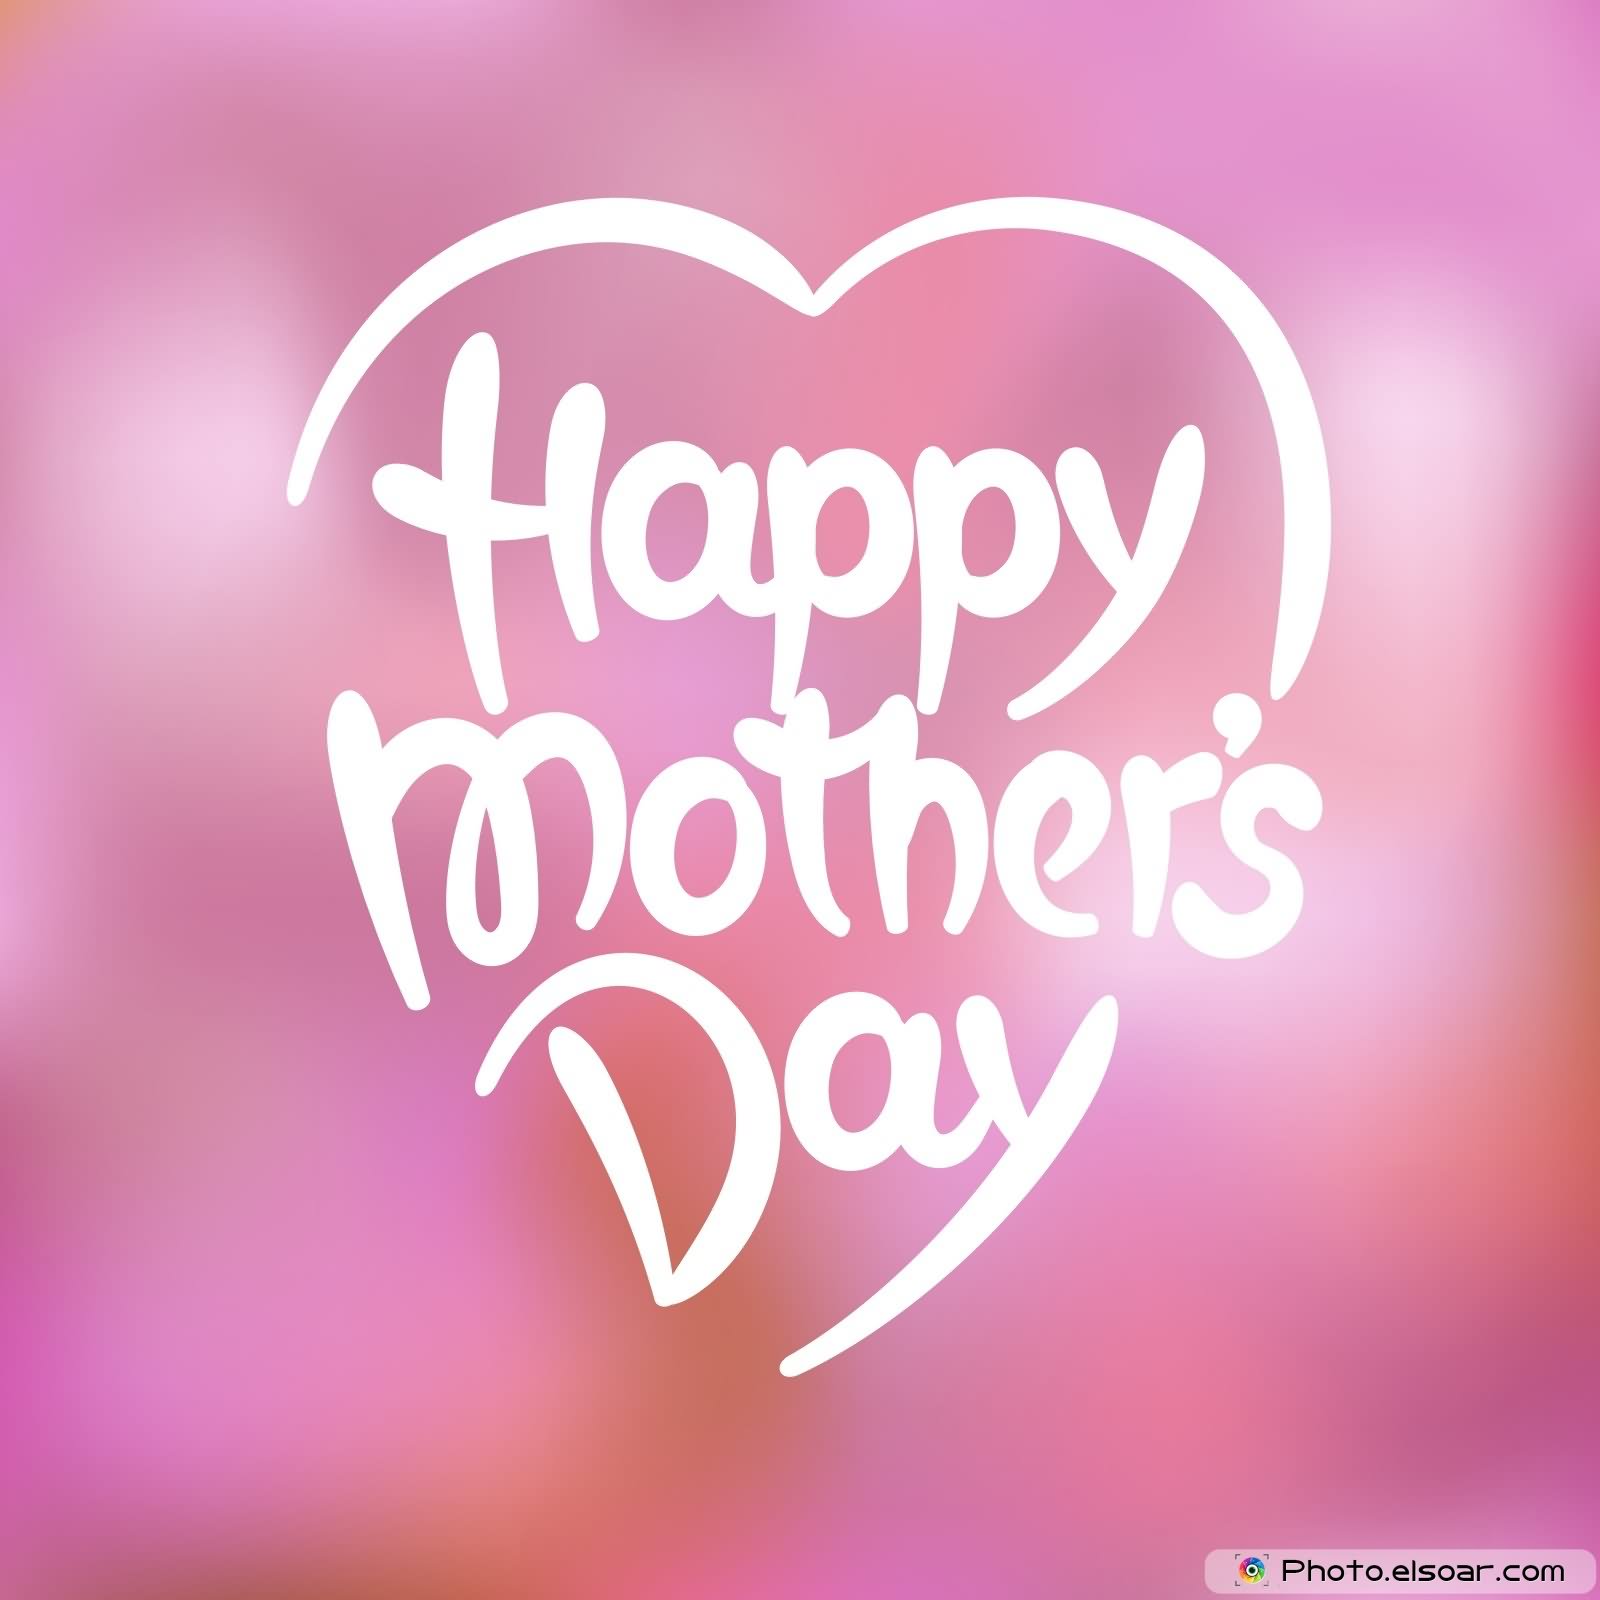 Happy Mother’s Day Beautiful Wish Picture